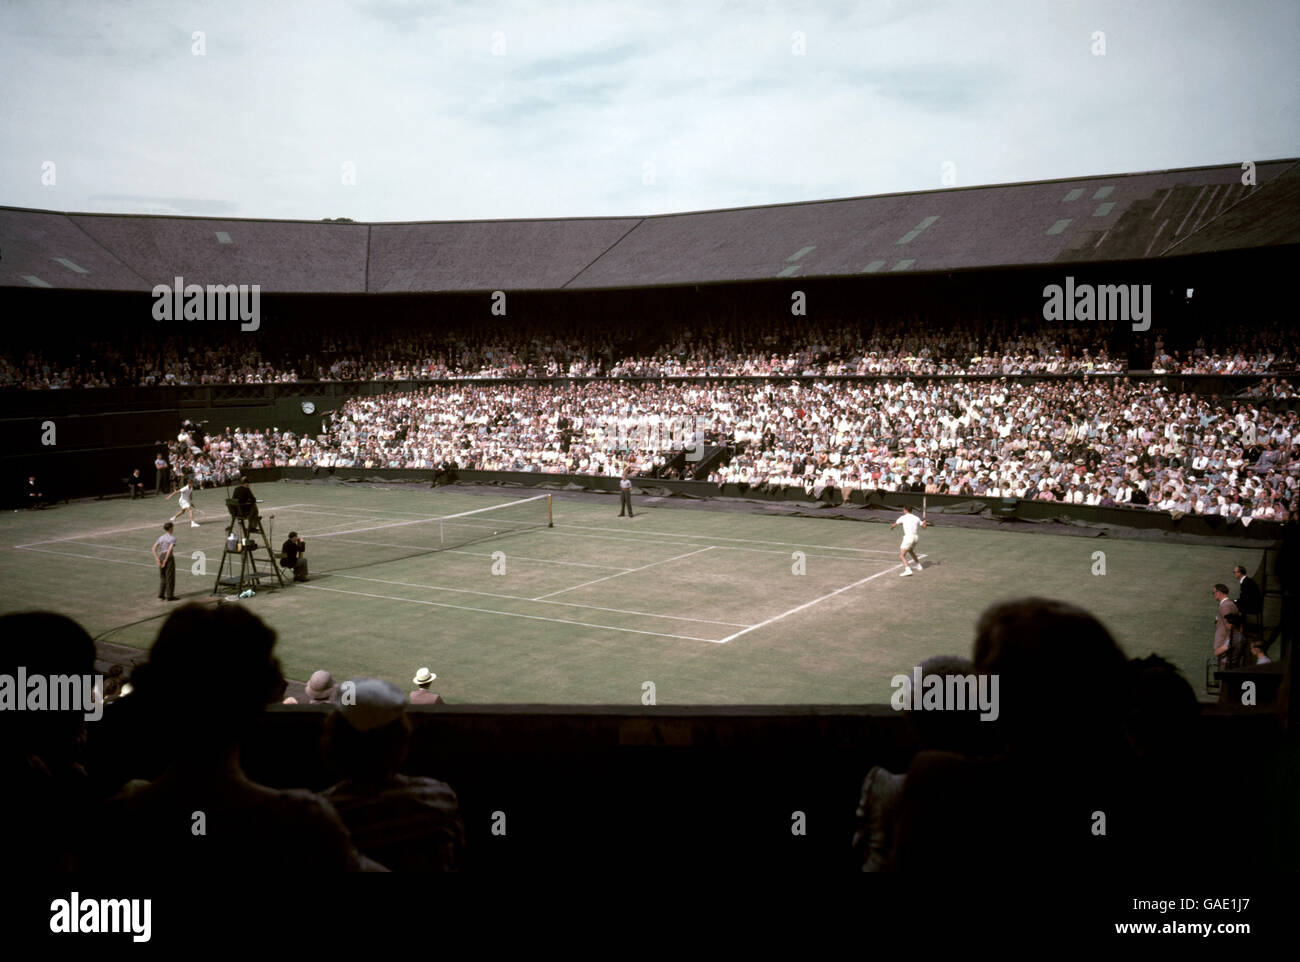 Tennis - Wimbledon Championships. General view of play on Centre Court during the Wimbledon Tennis Championships. Stock Photo